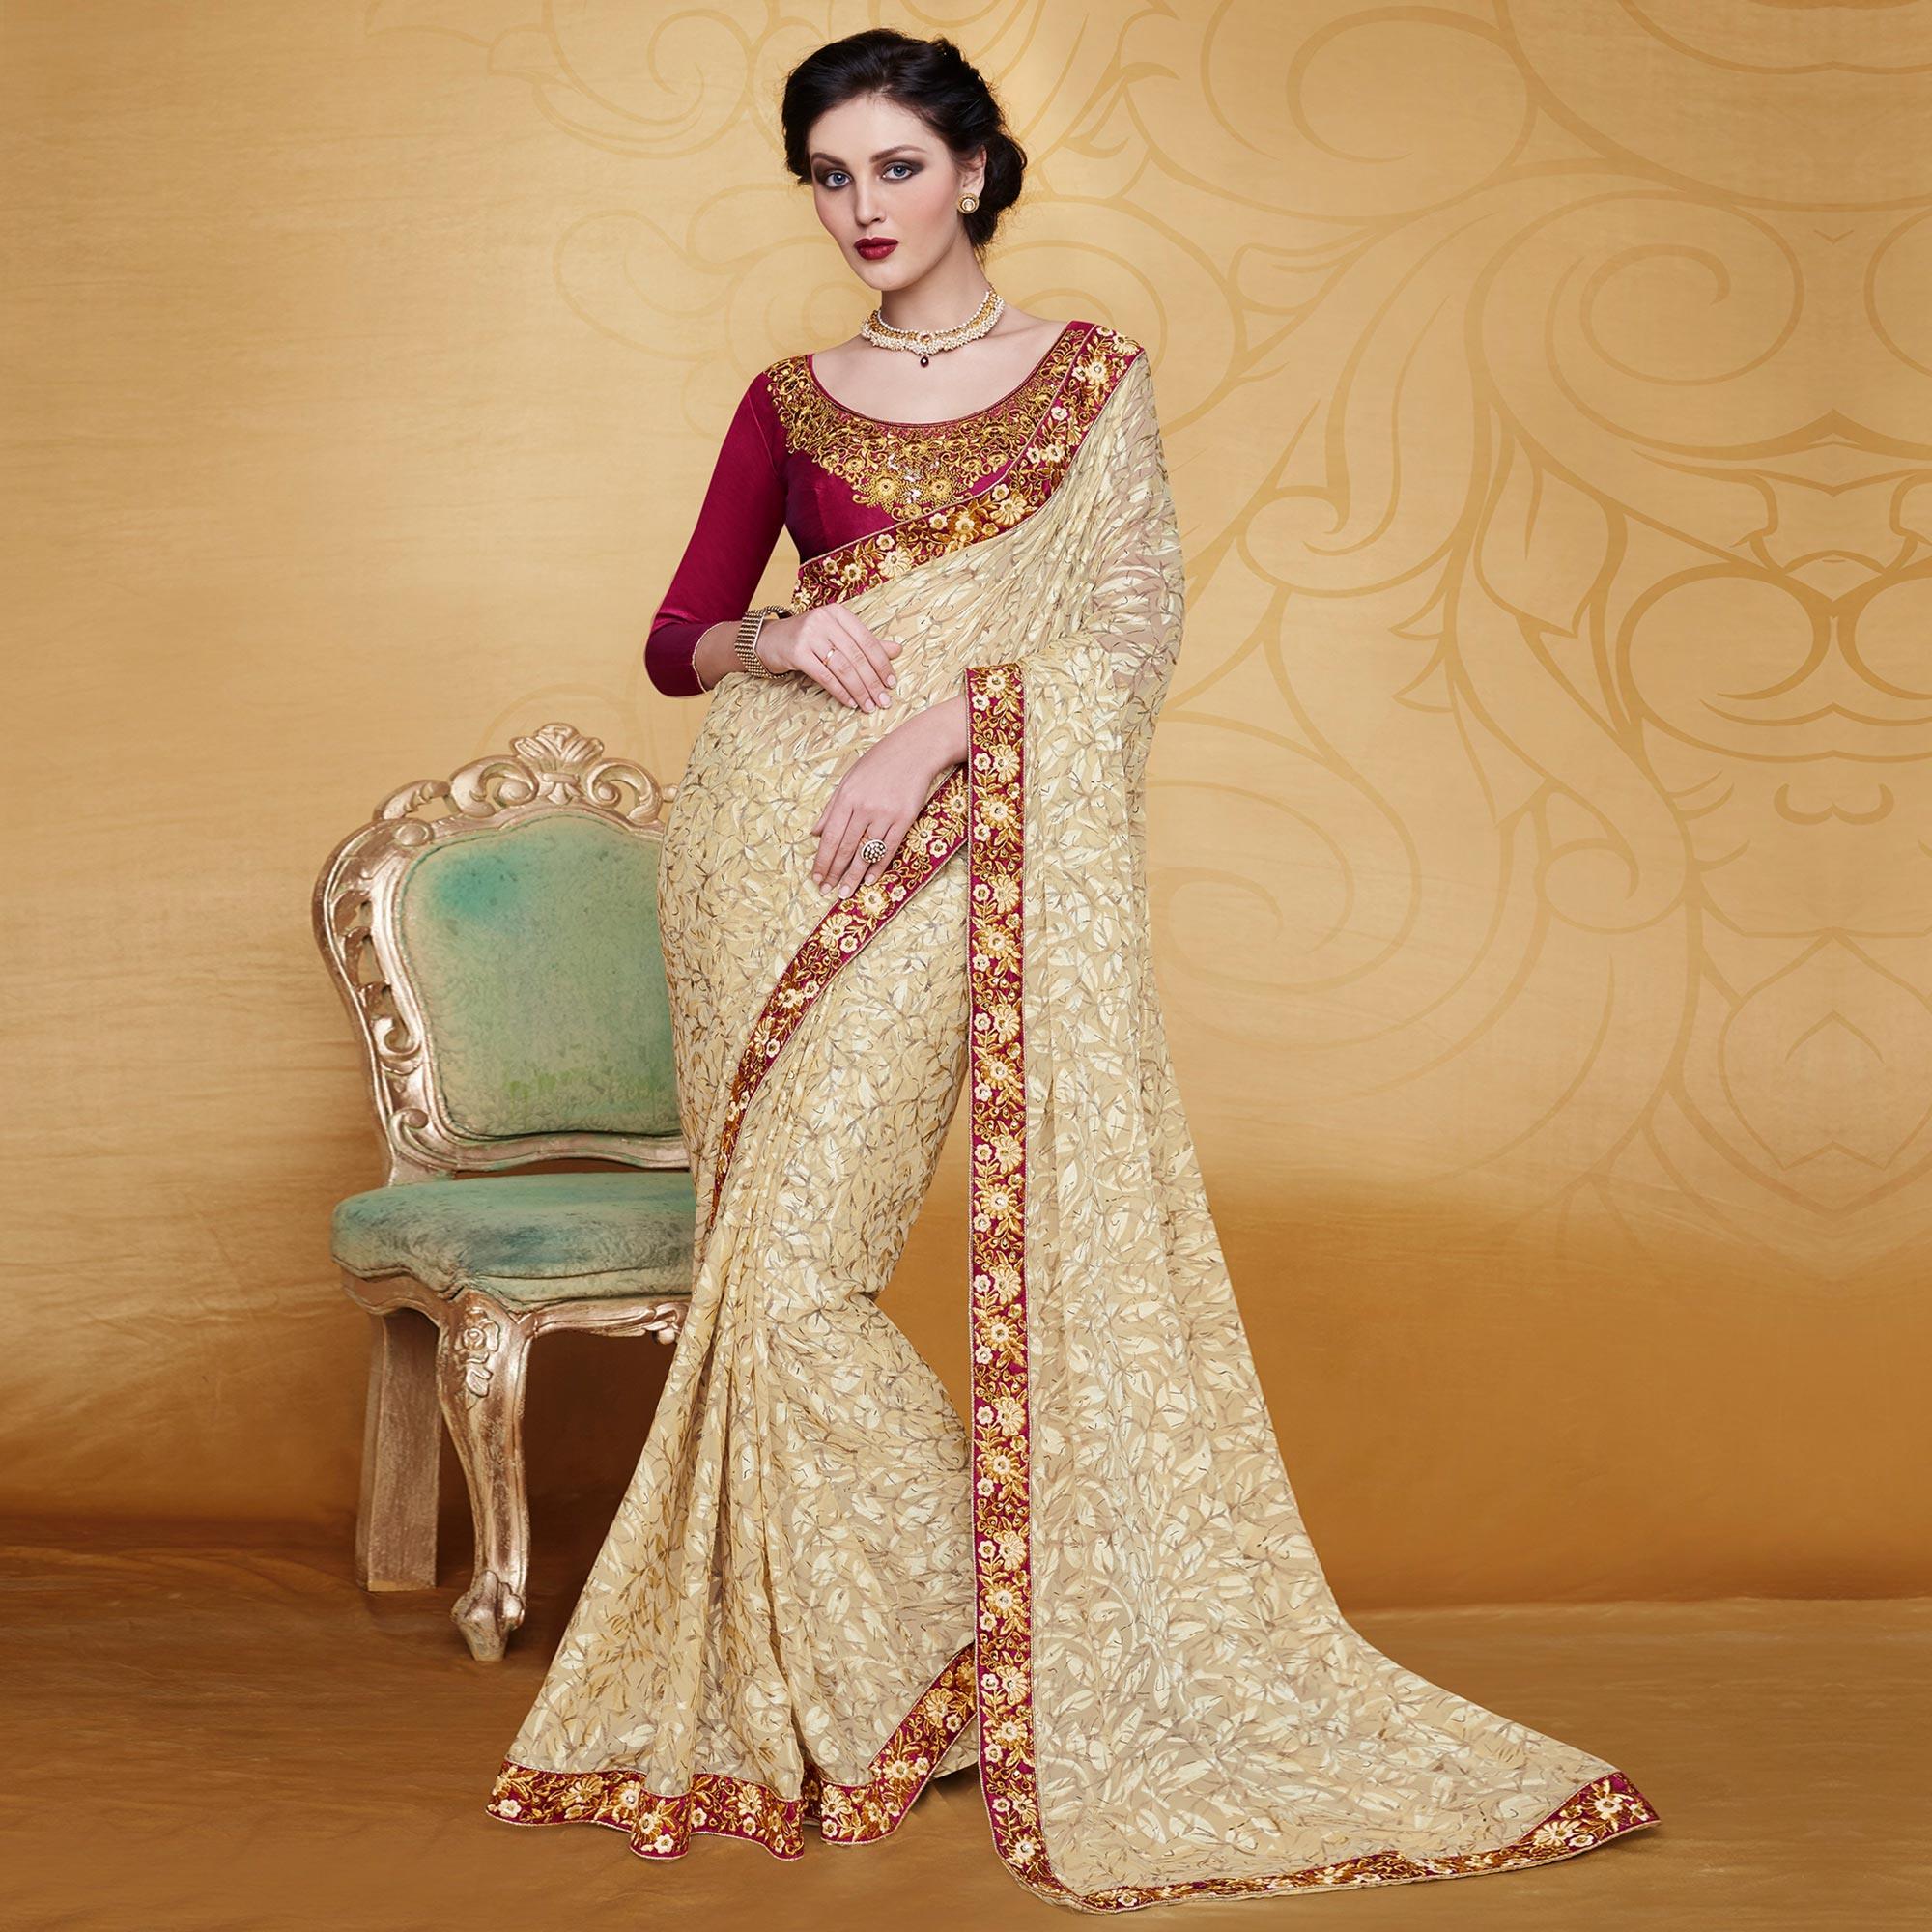 Engrossing Beige Colored Partywear Embroidered Brasso Saree - Peachmode